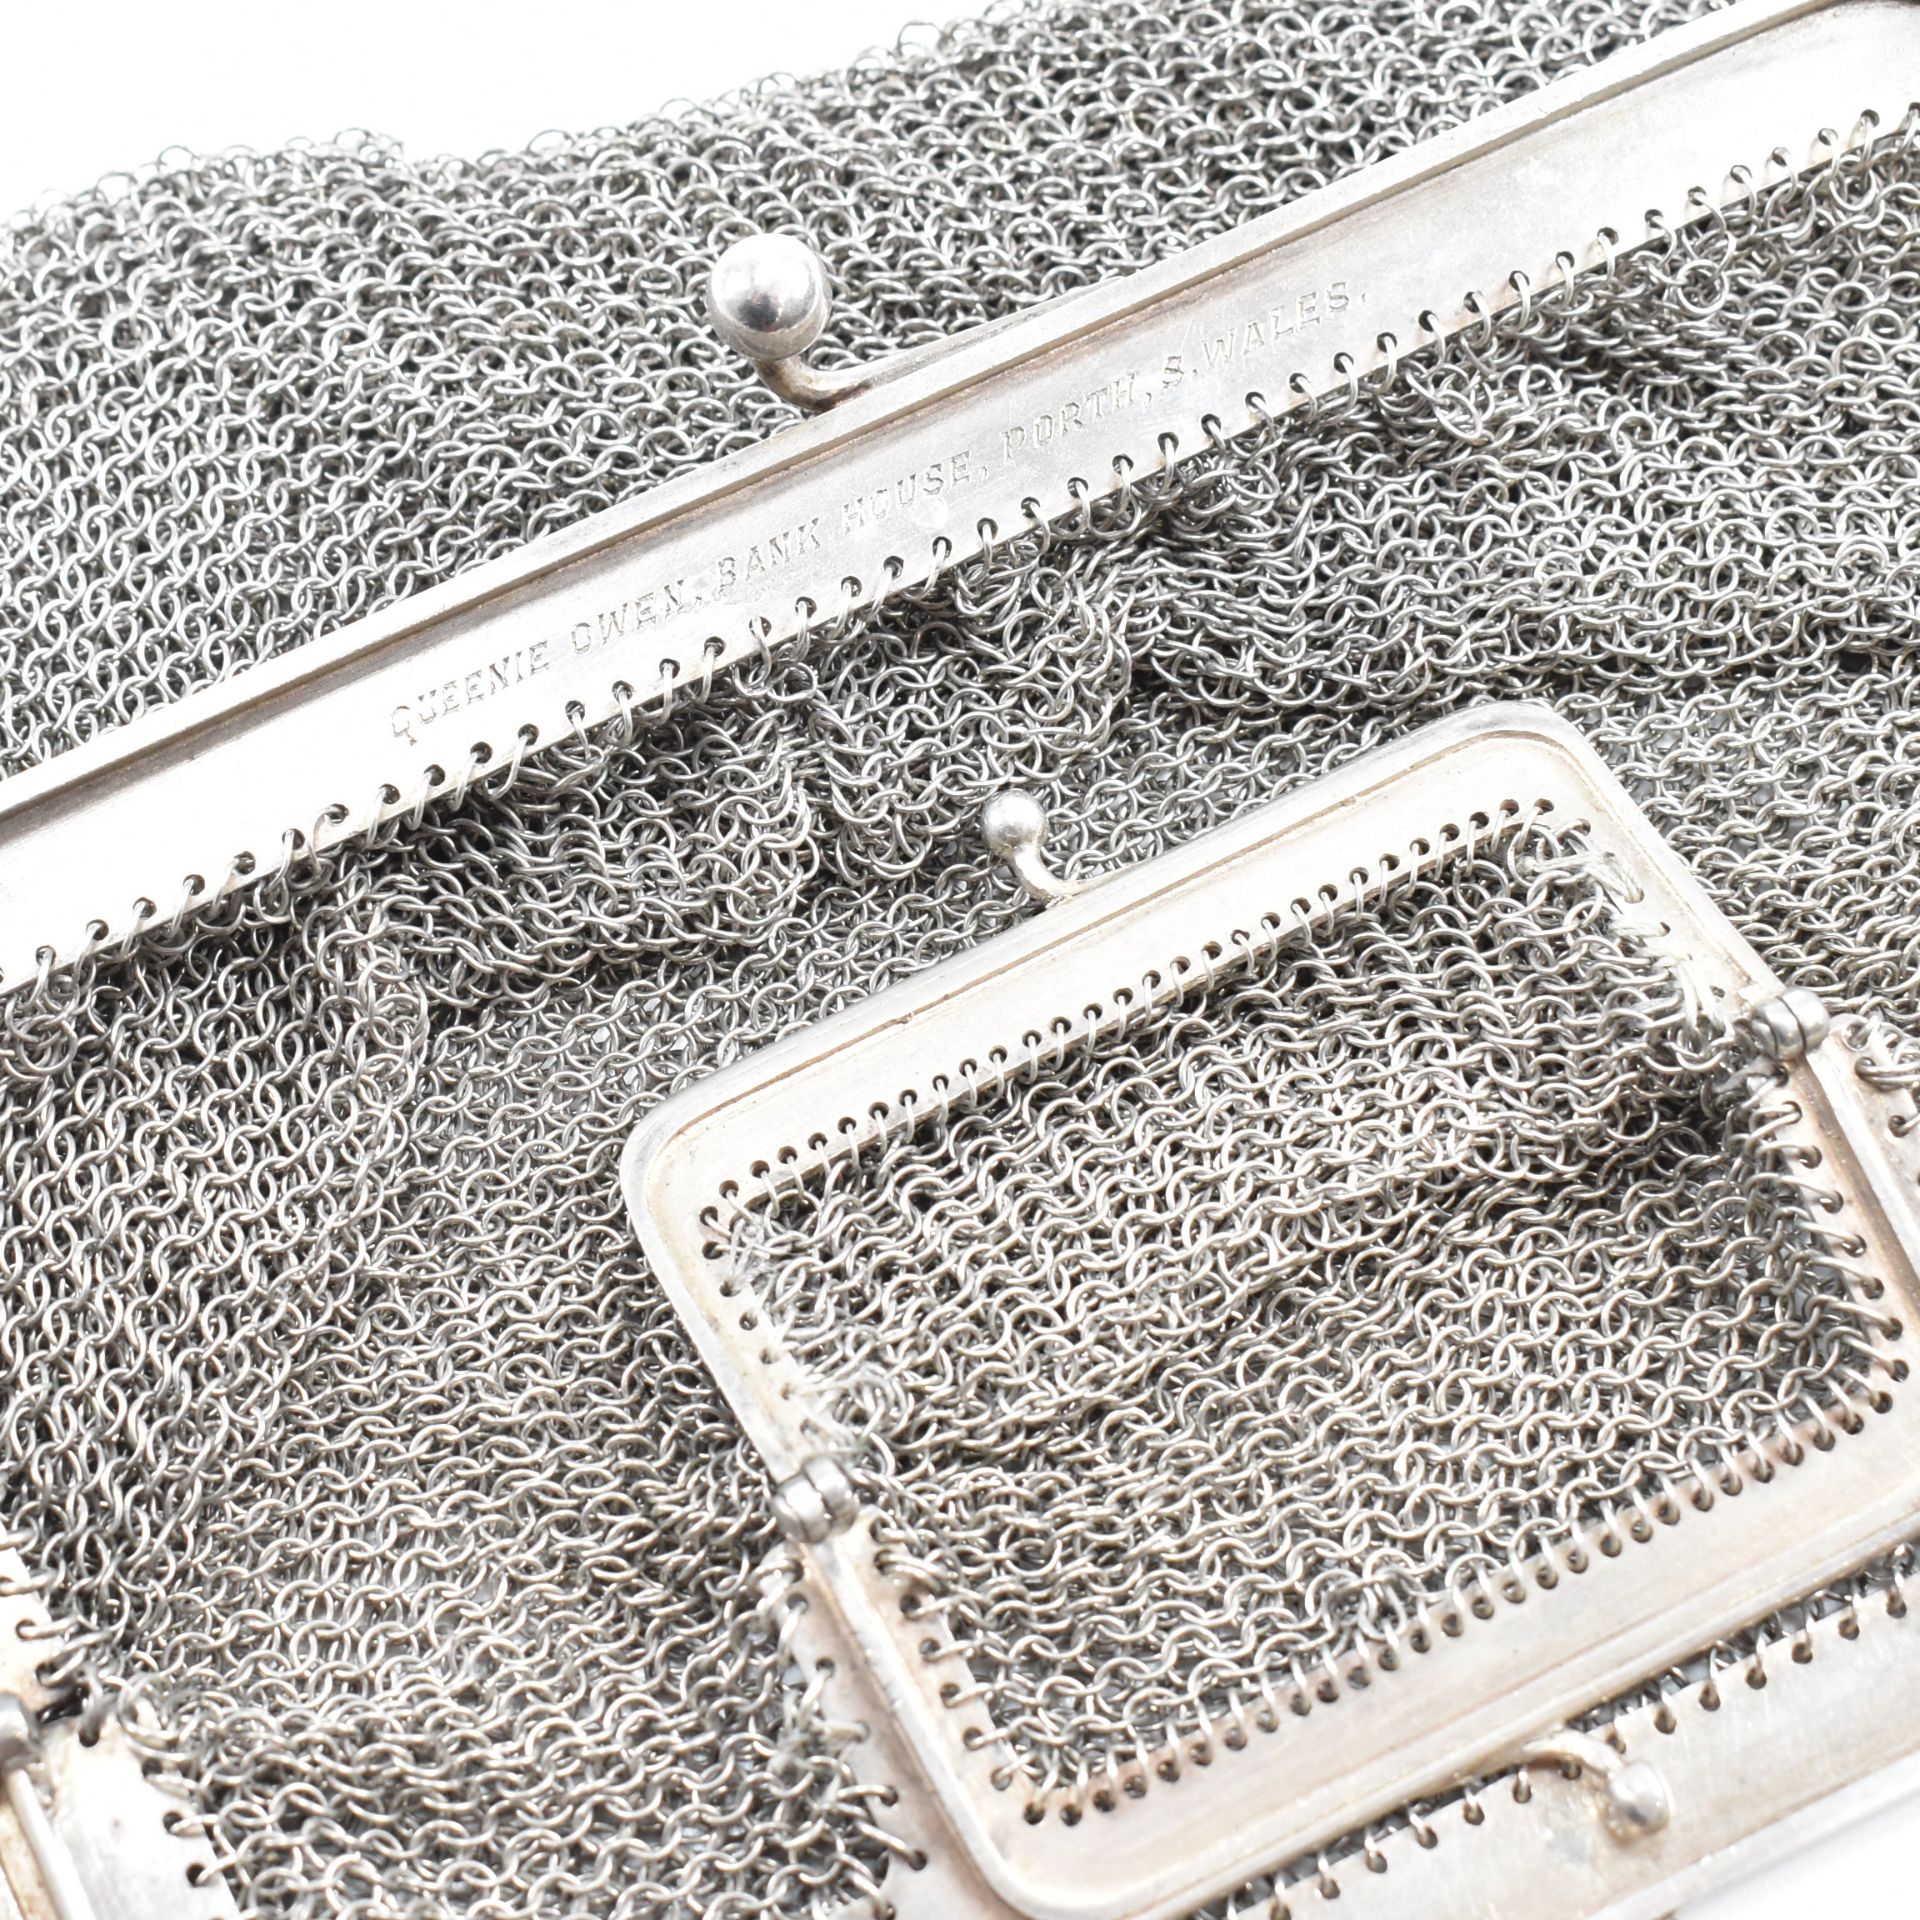 EARLY 20TH CENTURY 925 SILVER MESH EVENING BAG - Image 6 of 8